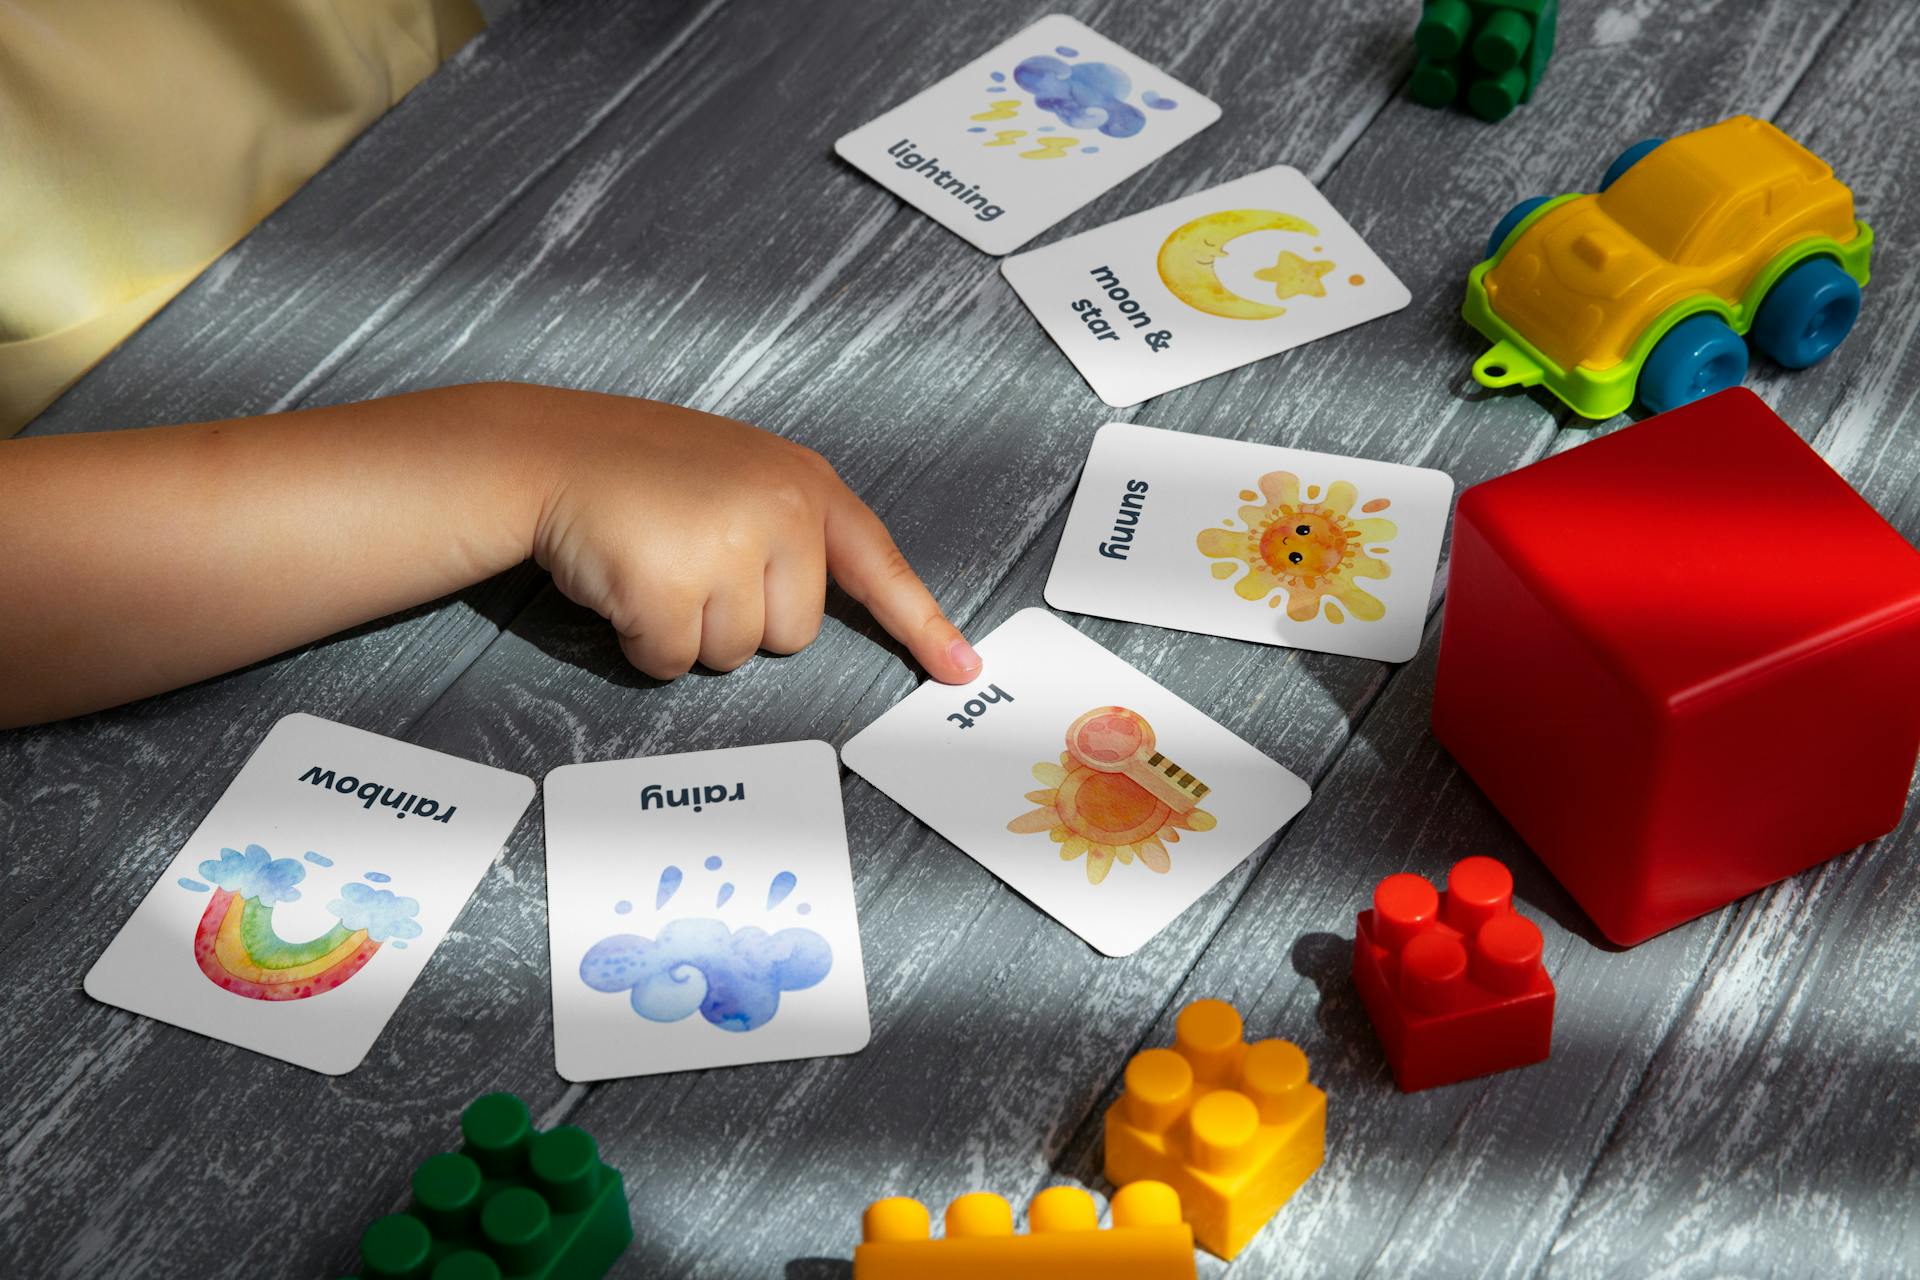 A close-up of a child pointing at a card lying on a table with blocks | Source: Pexels